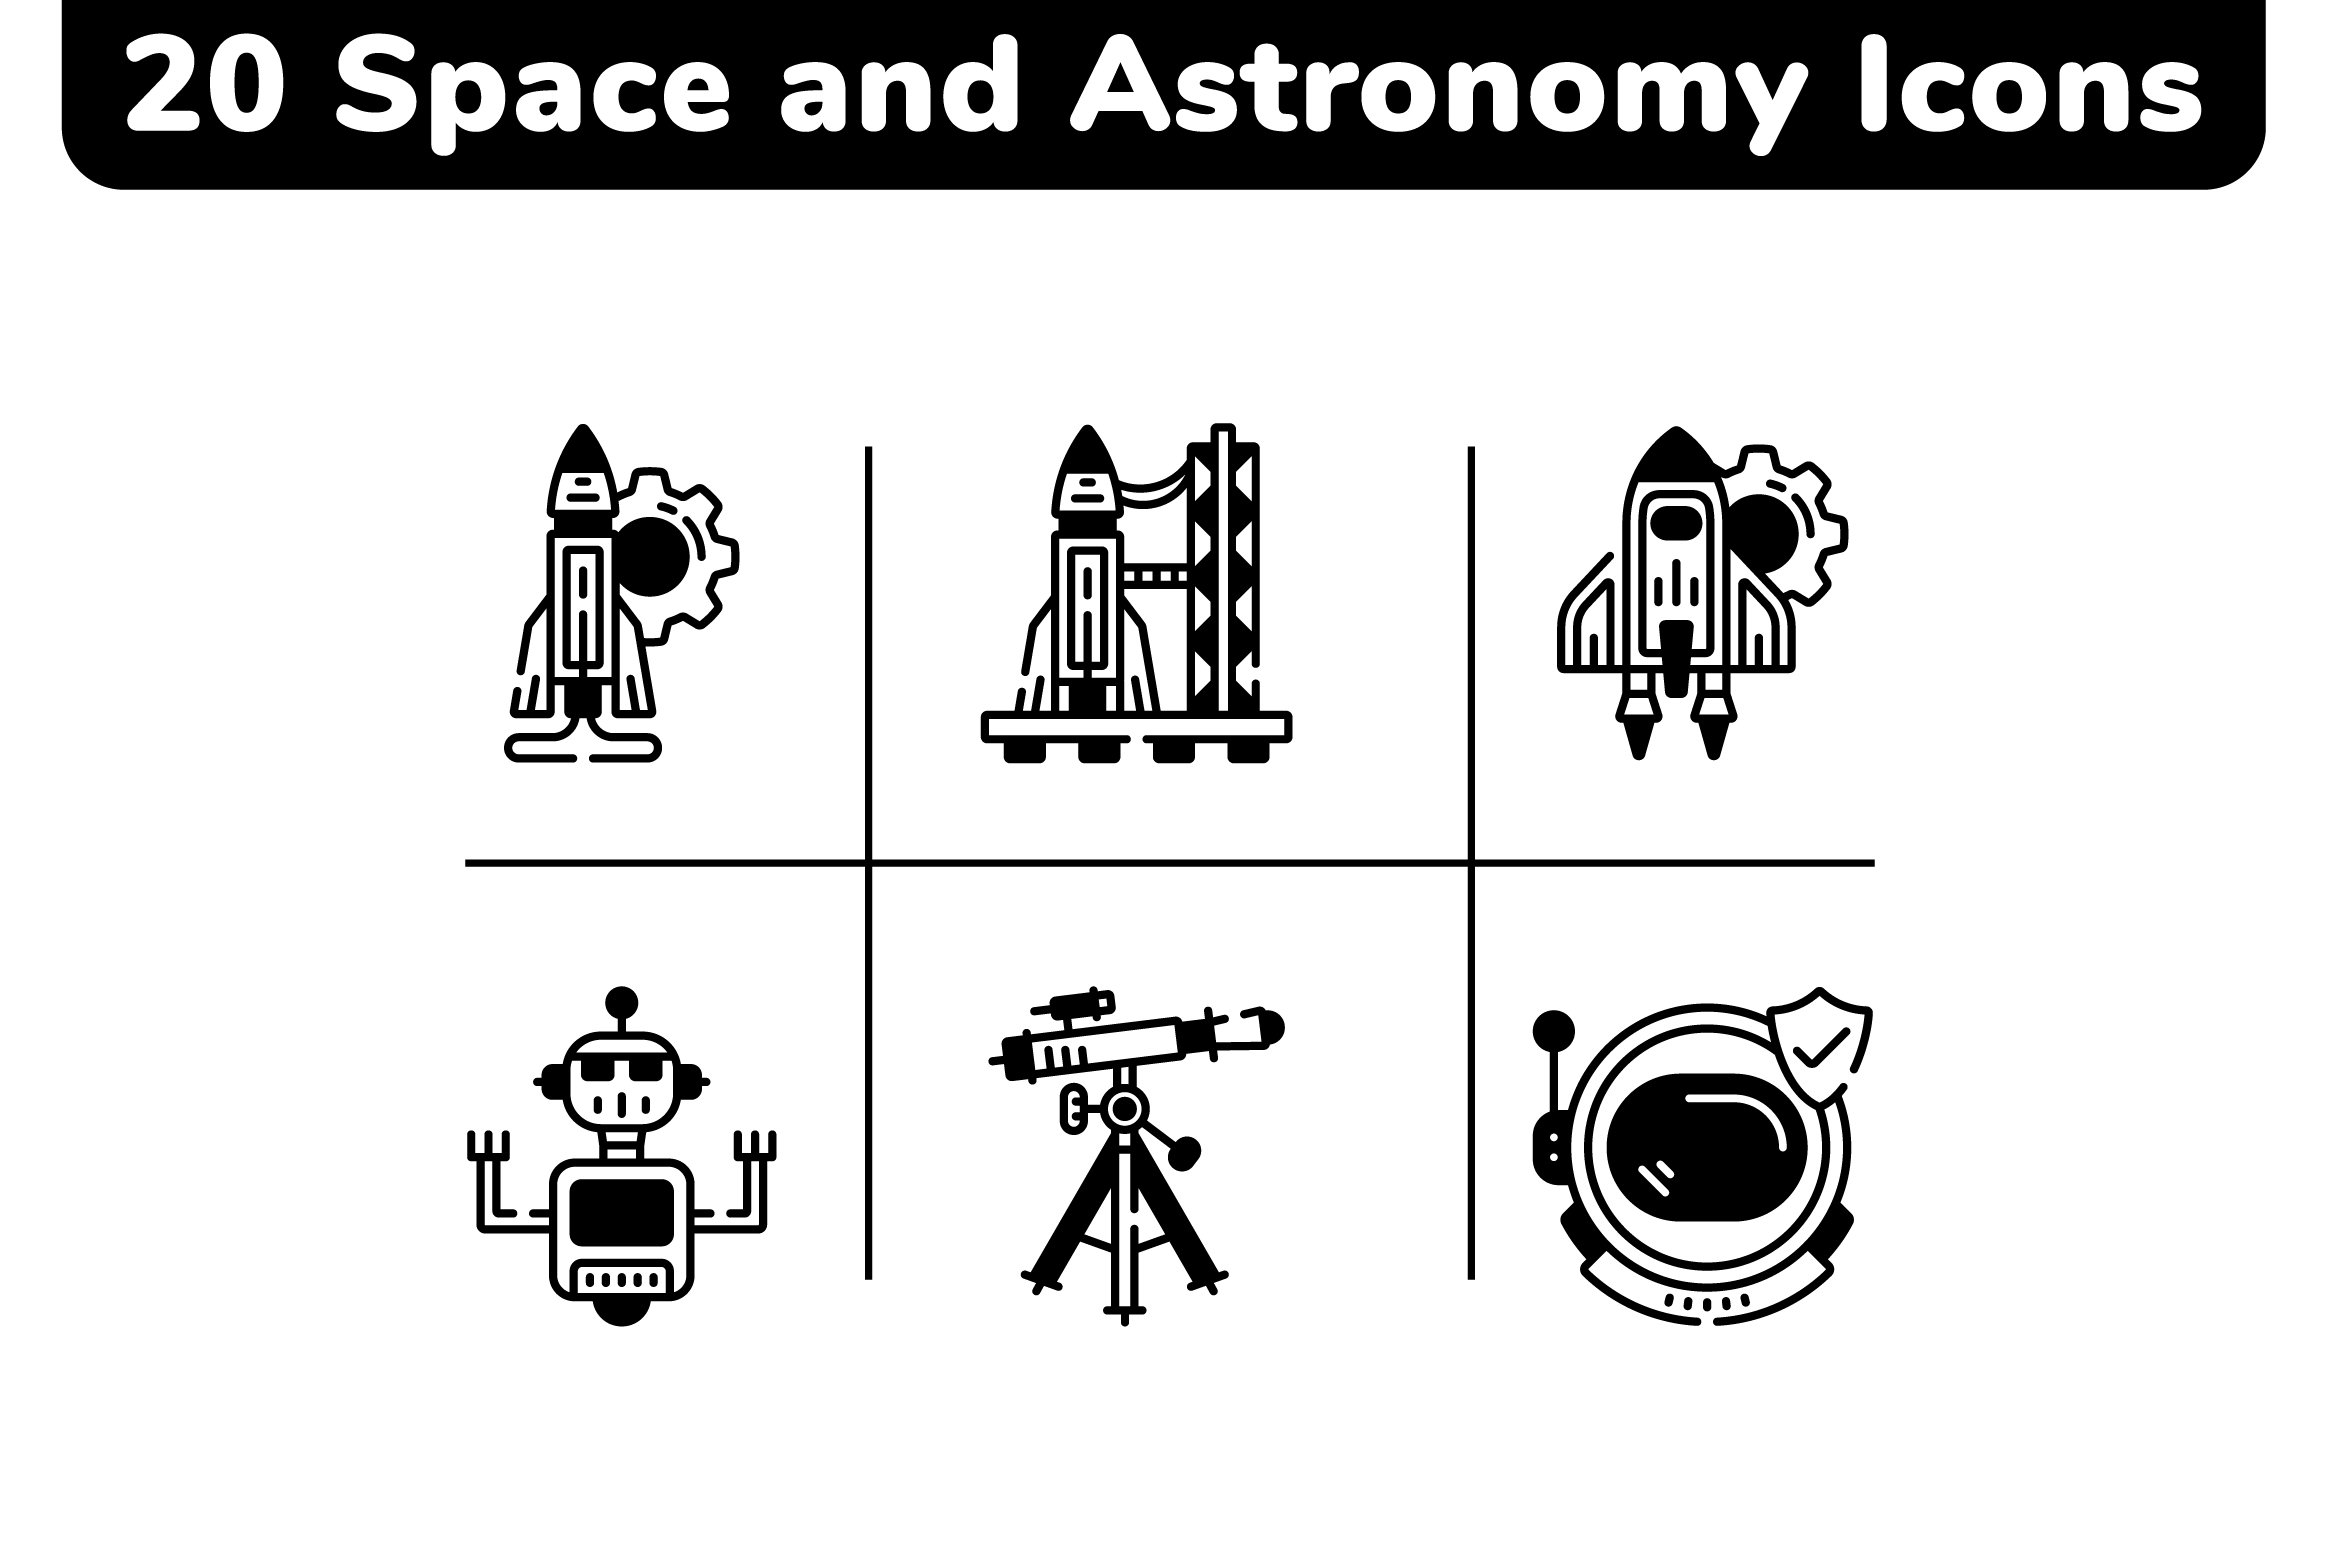 20 Space and Astronomy Black Icons cover image.